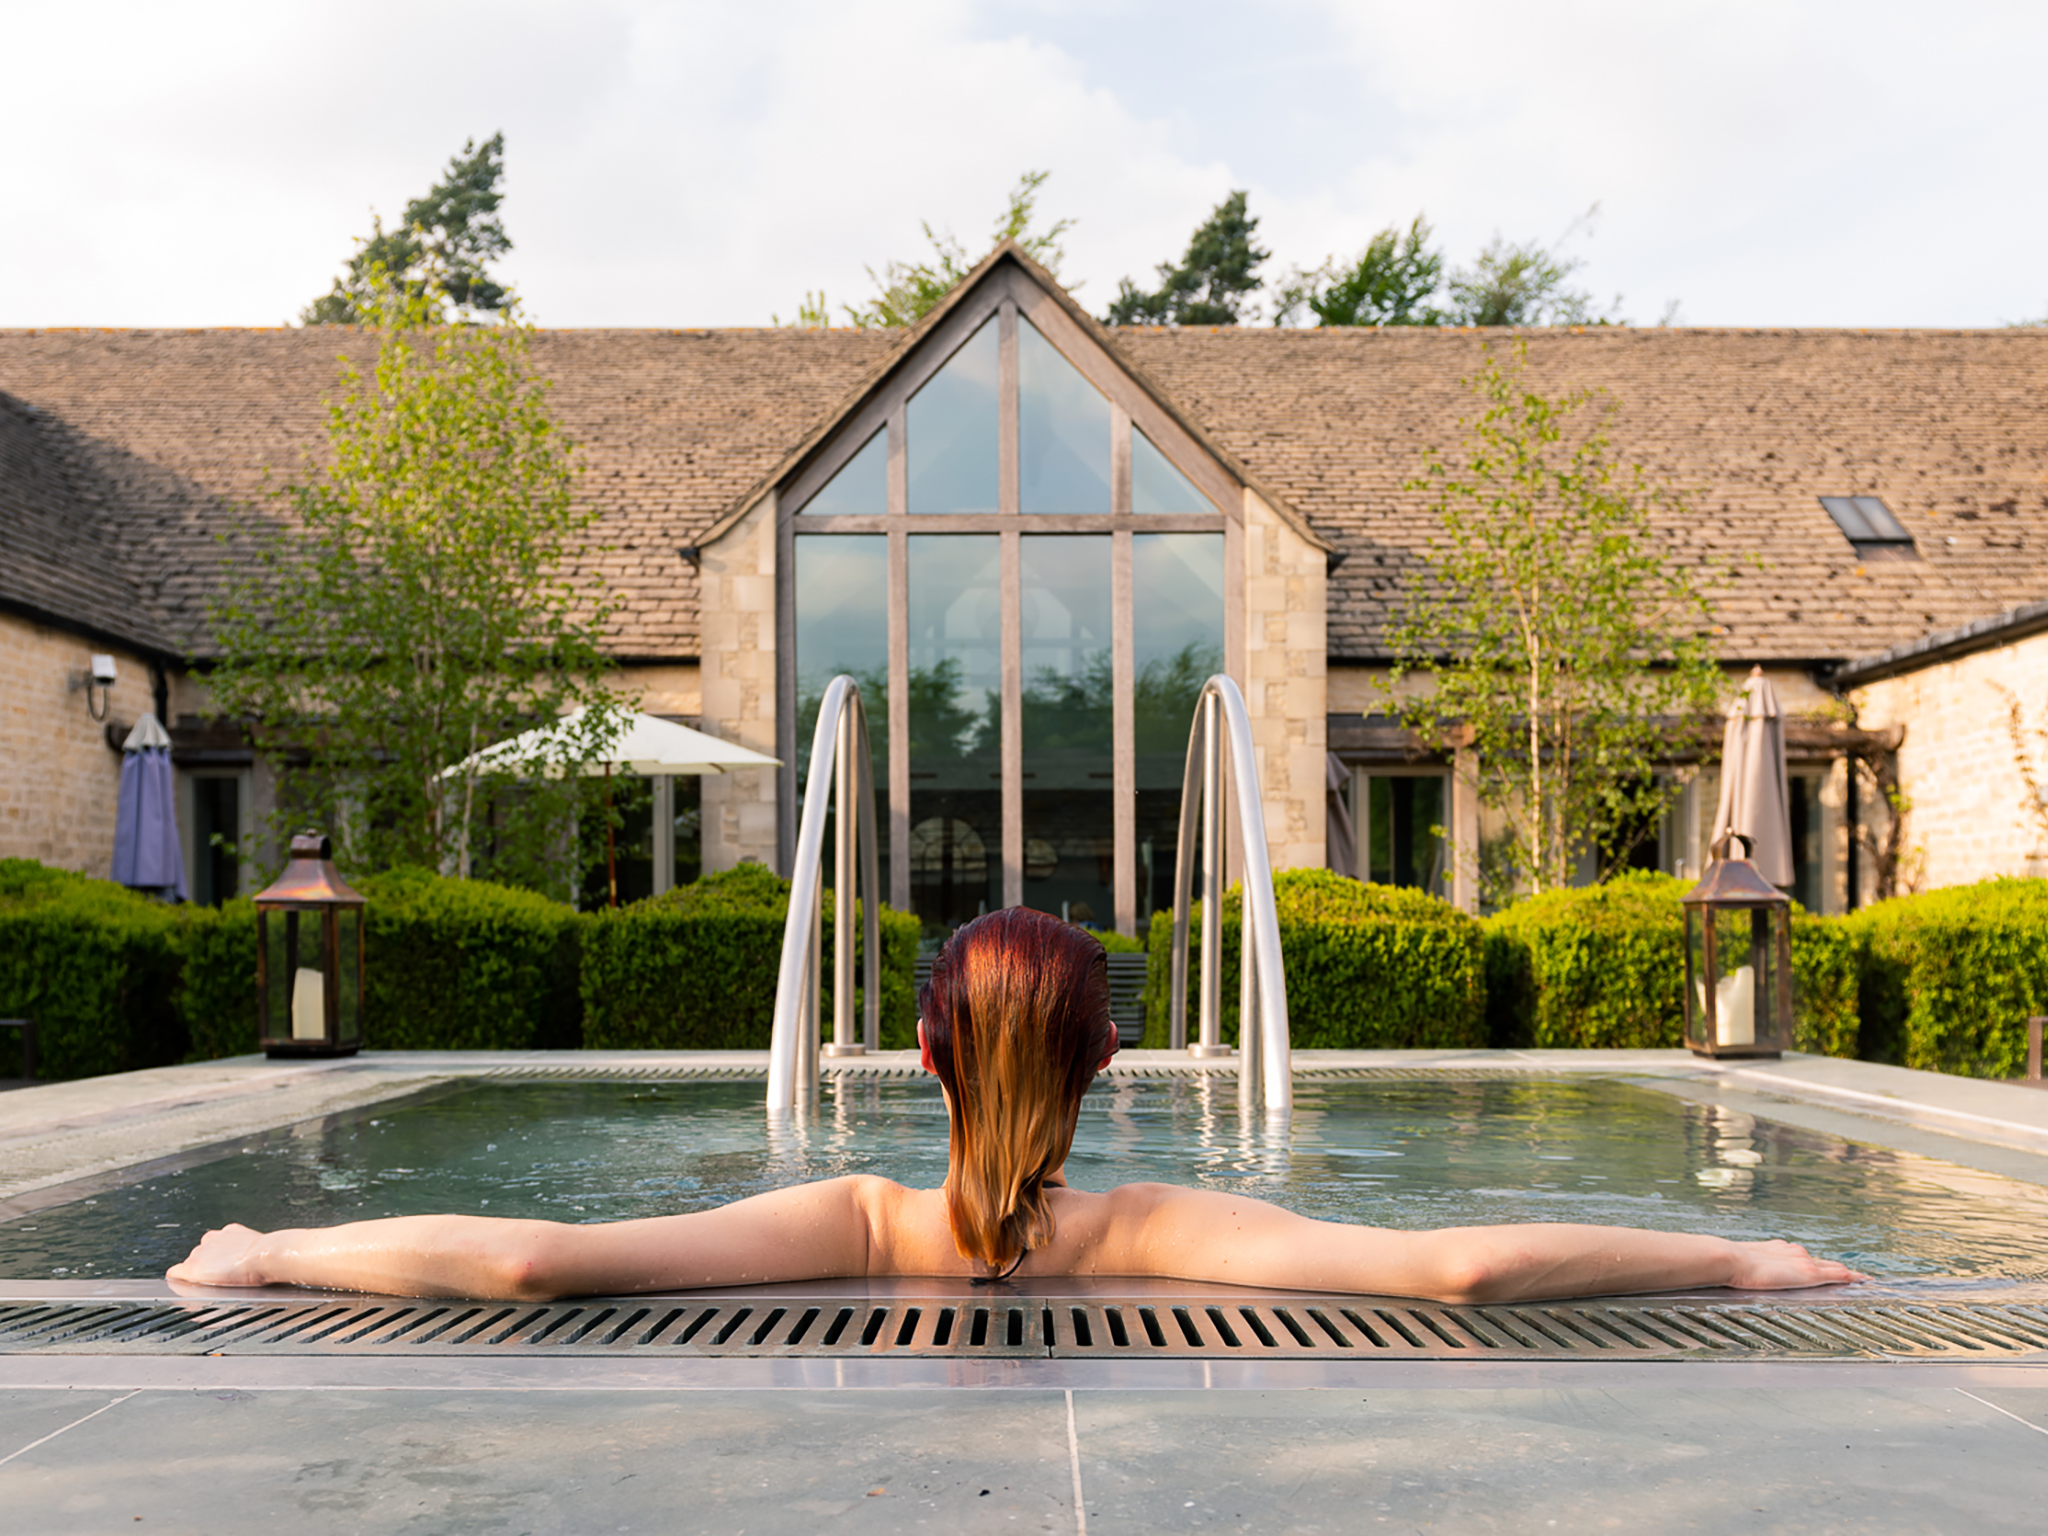 The Calcot & Spa hotel has 35 rooms and a plethora of spa activities